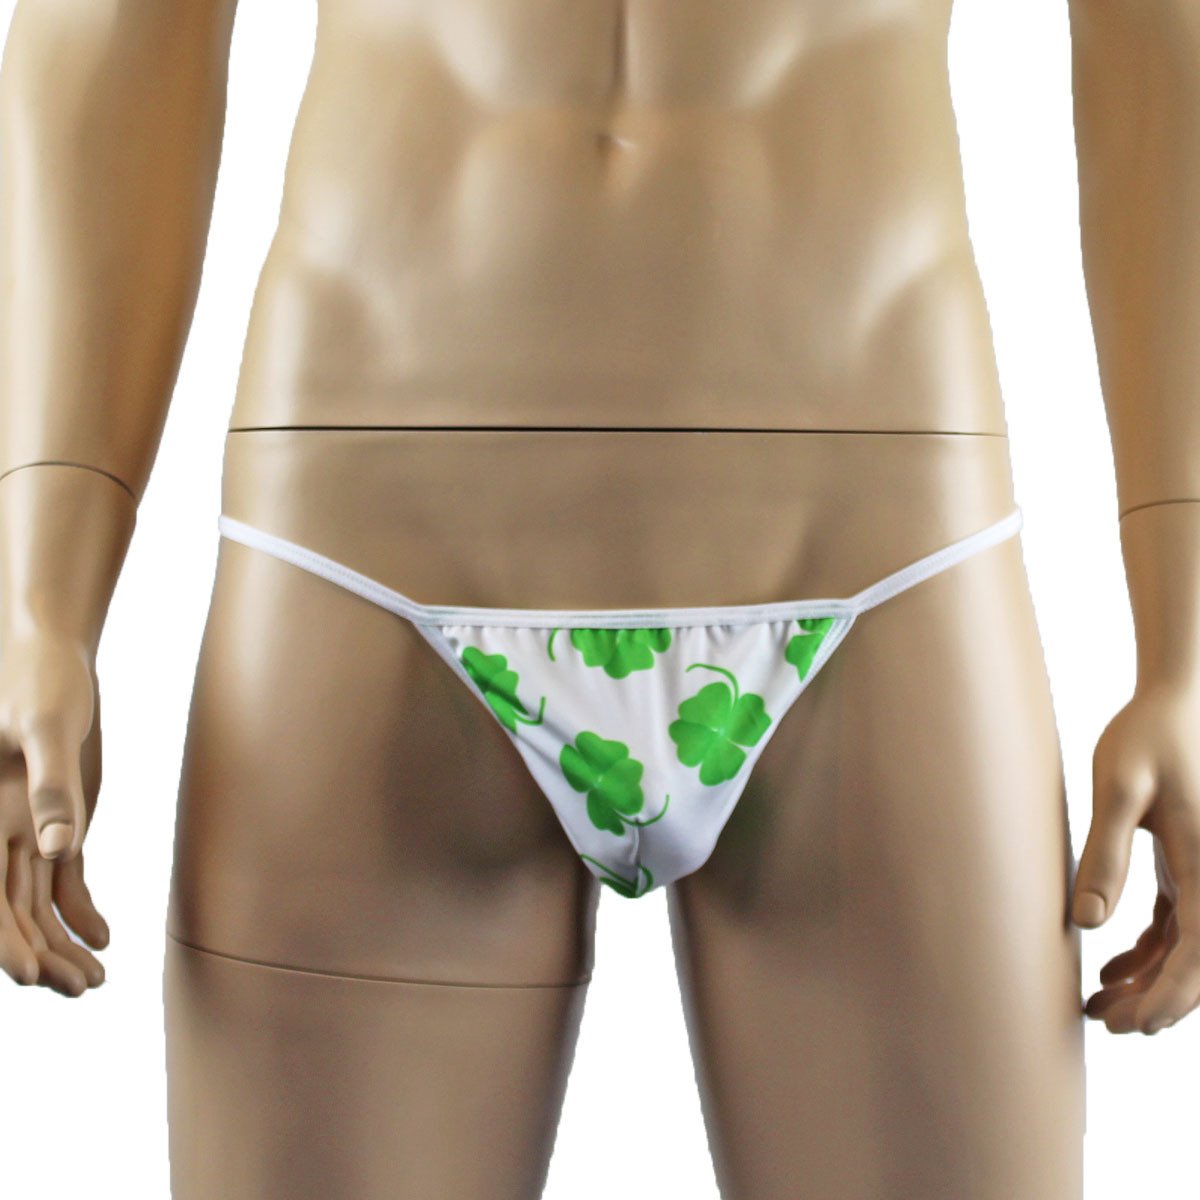 Mens St Patricks Day Lucky 4 Leaf Clover Crop Top and G string